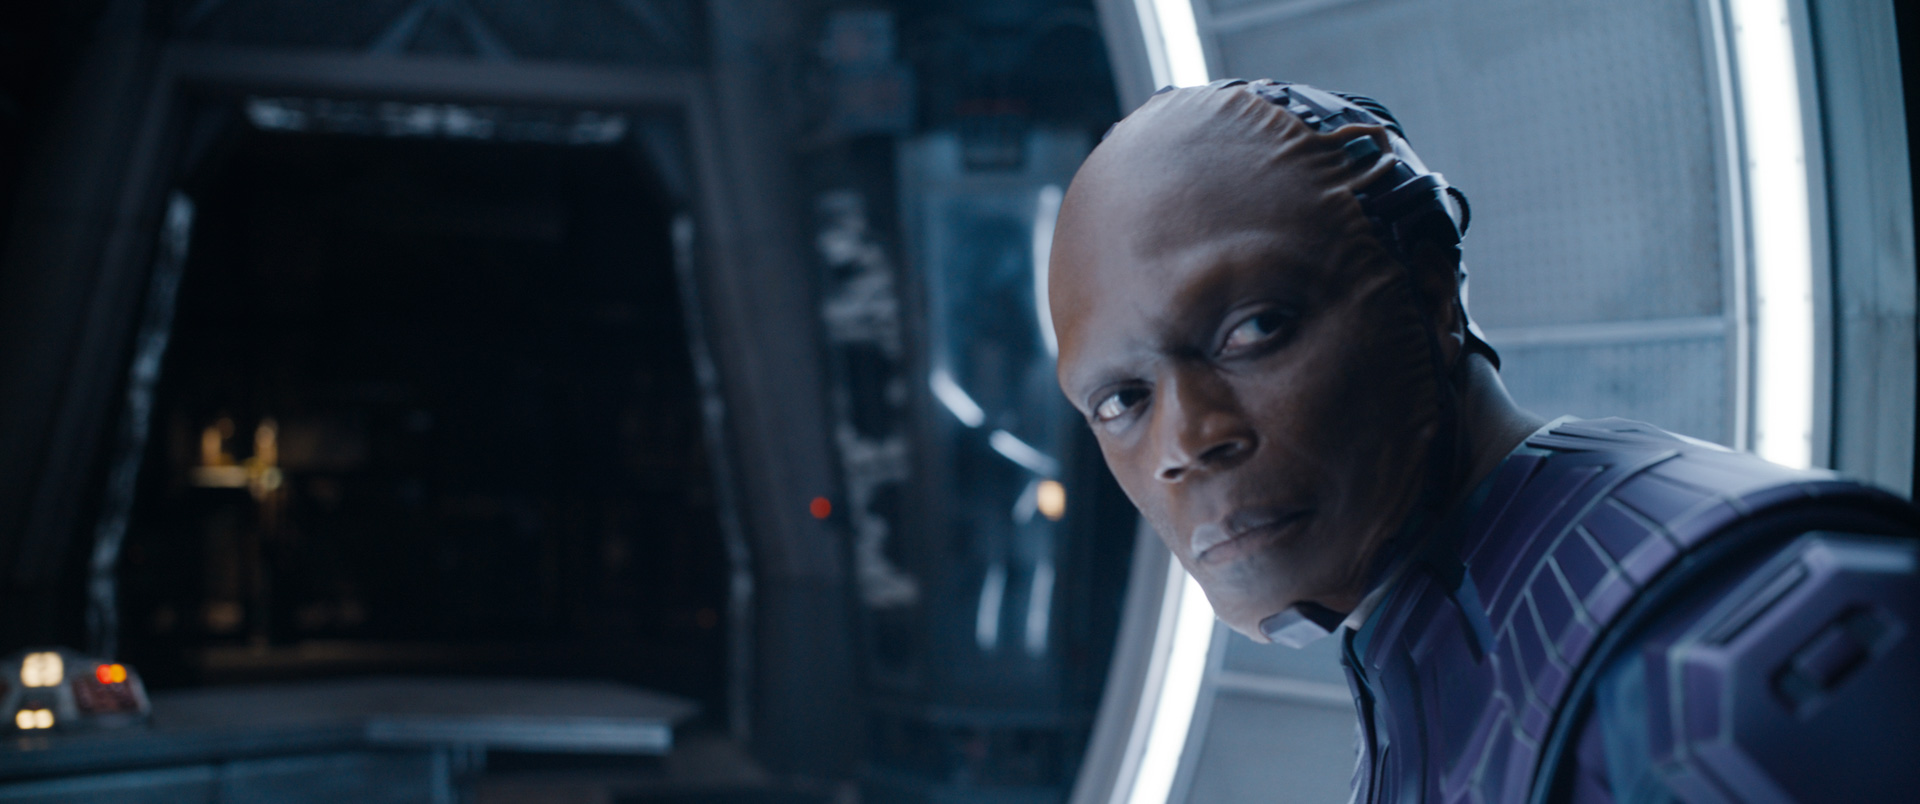 An image of Chukwudi Iwuji as The High Evolutionary in Guardians of the Galaxy Vol. 3. He stares over his shoulder, and while his face appears as a human, the back half of his head is seemingly made of metal.